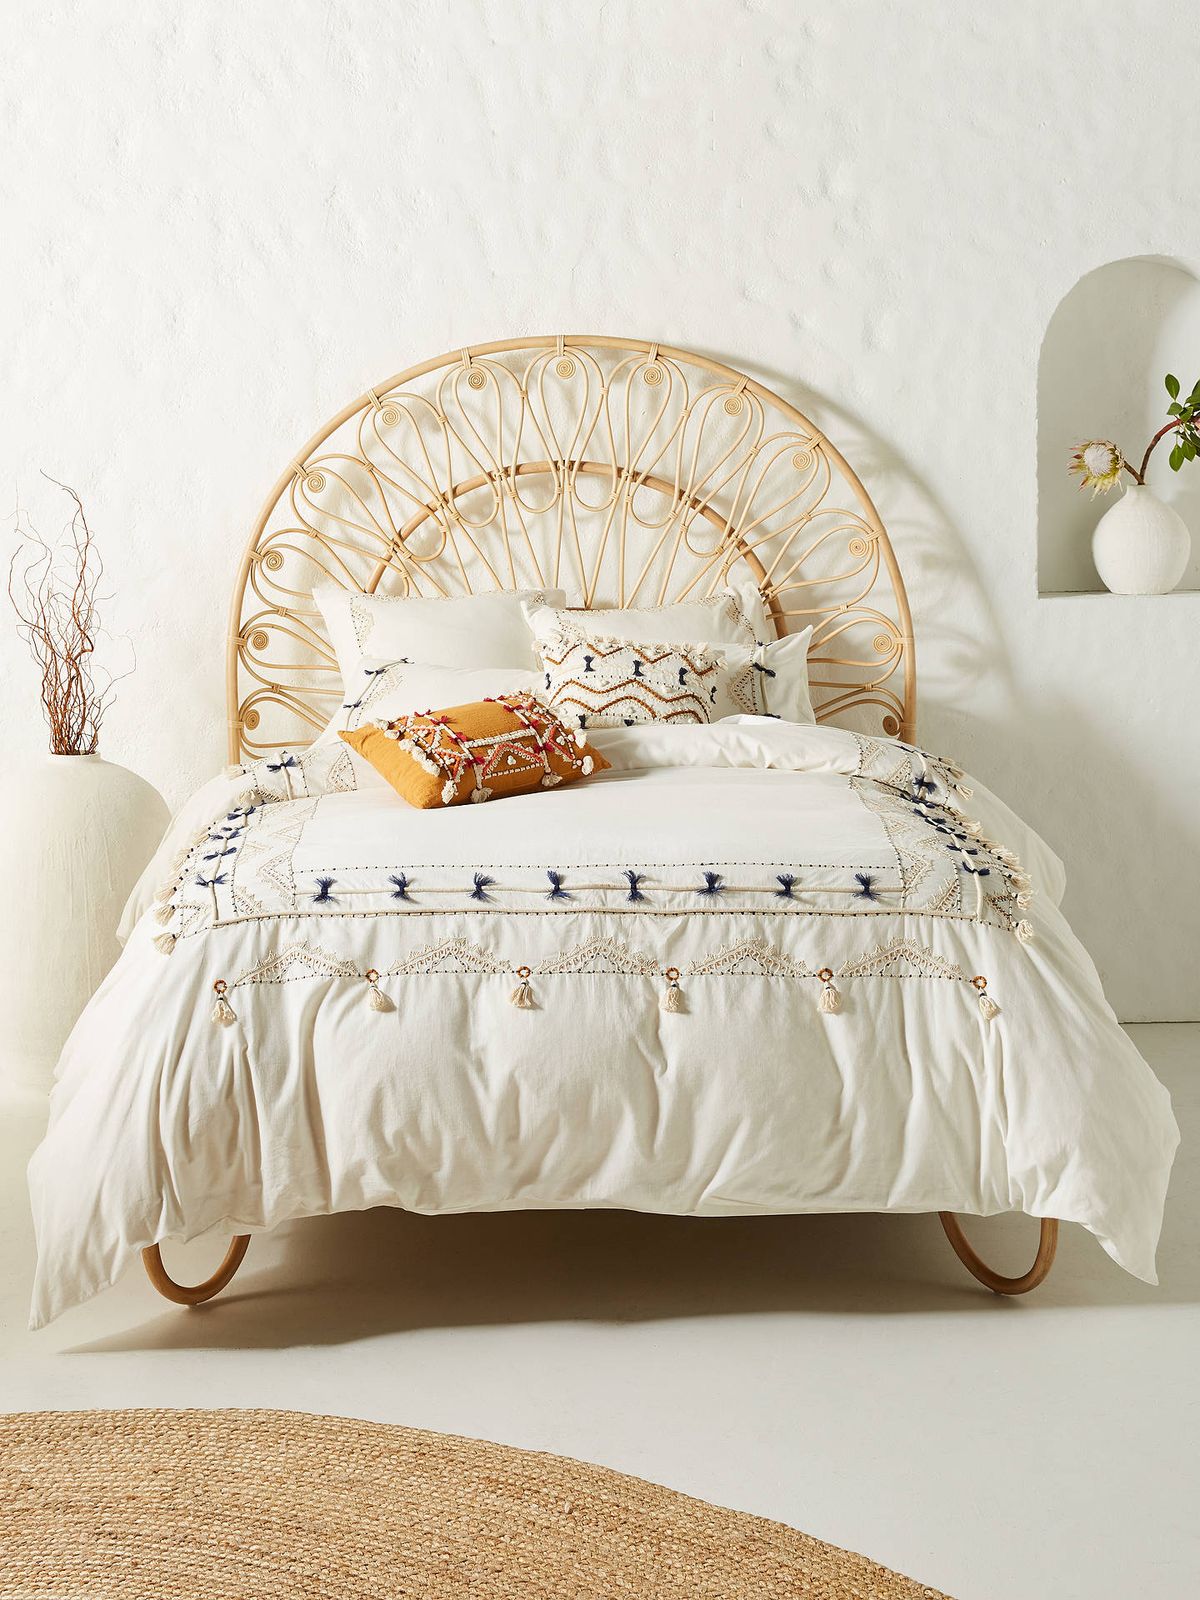 Looking For Bedding In John Lewis Check Out These Designer Deals